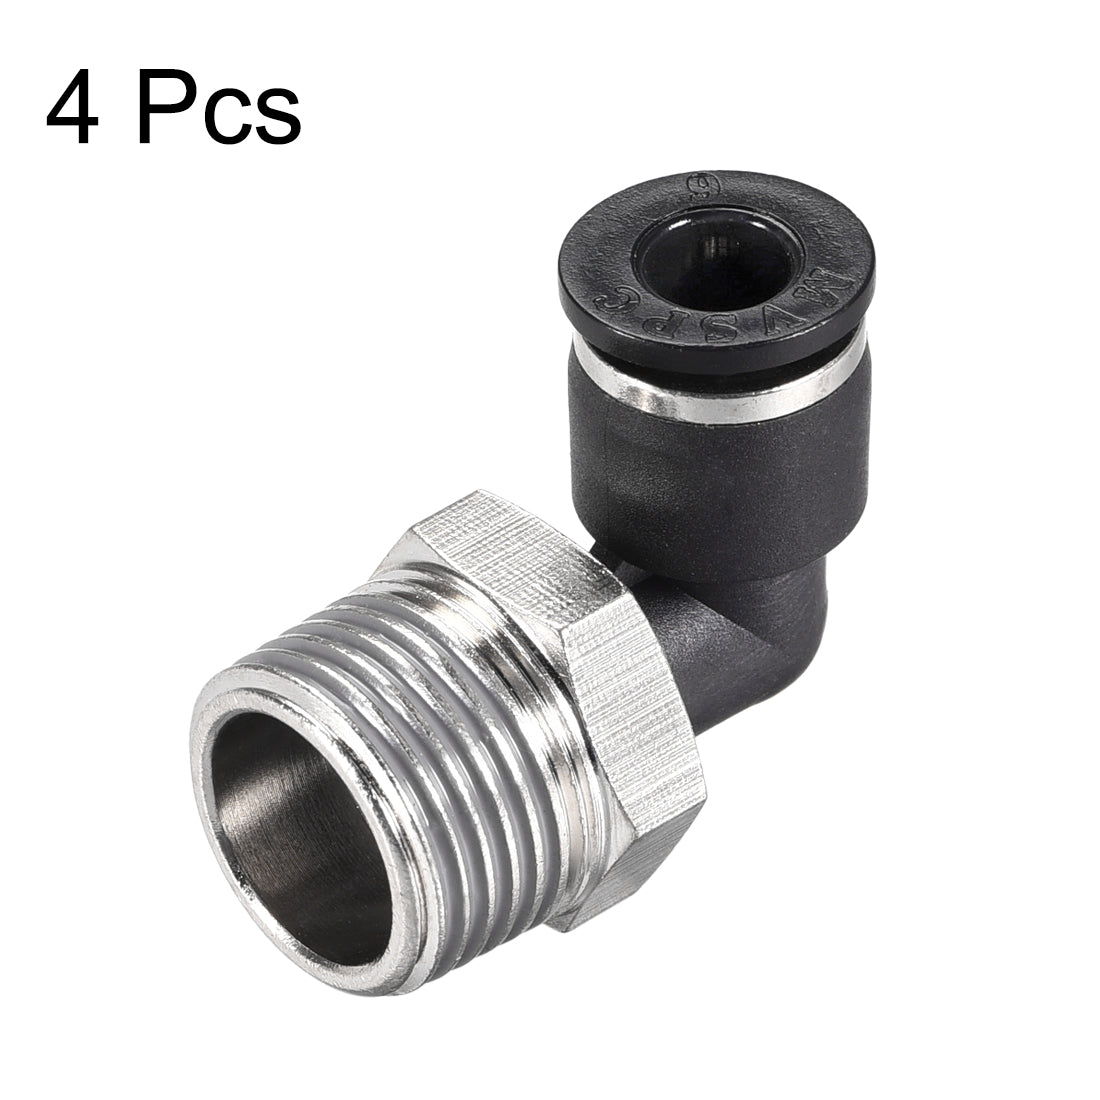 uxcell Uxcell Push to Connect Tube Fitting Male Elbow 6mm Tube OD x 3/8 NPT Thread Pneumatic Air Push Fit Lock Fitting 4pcs